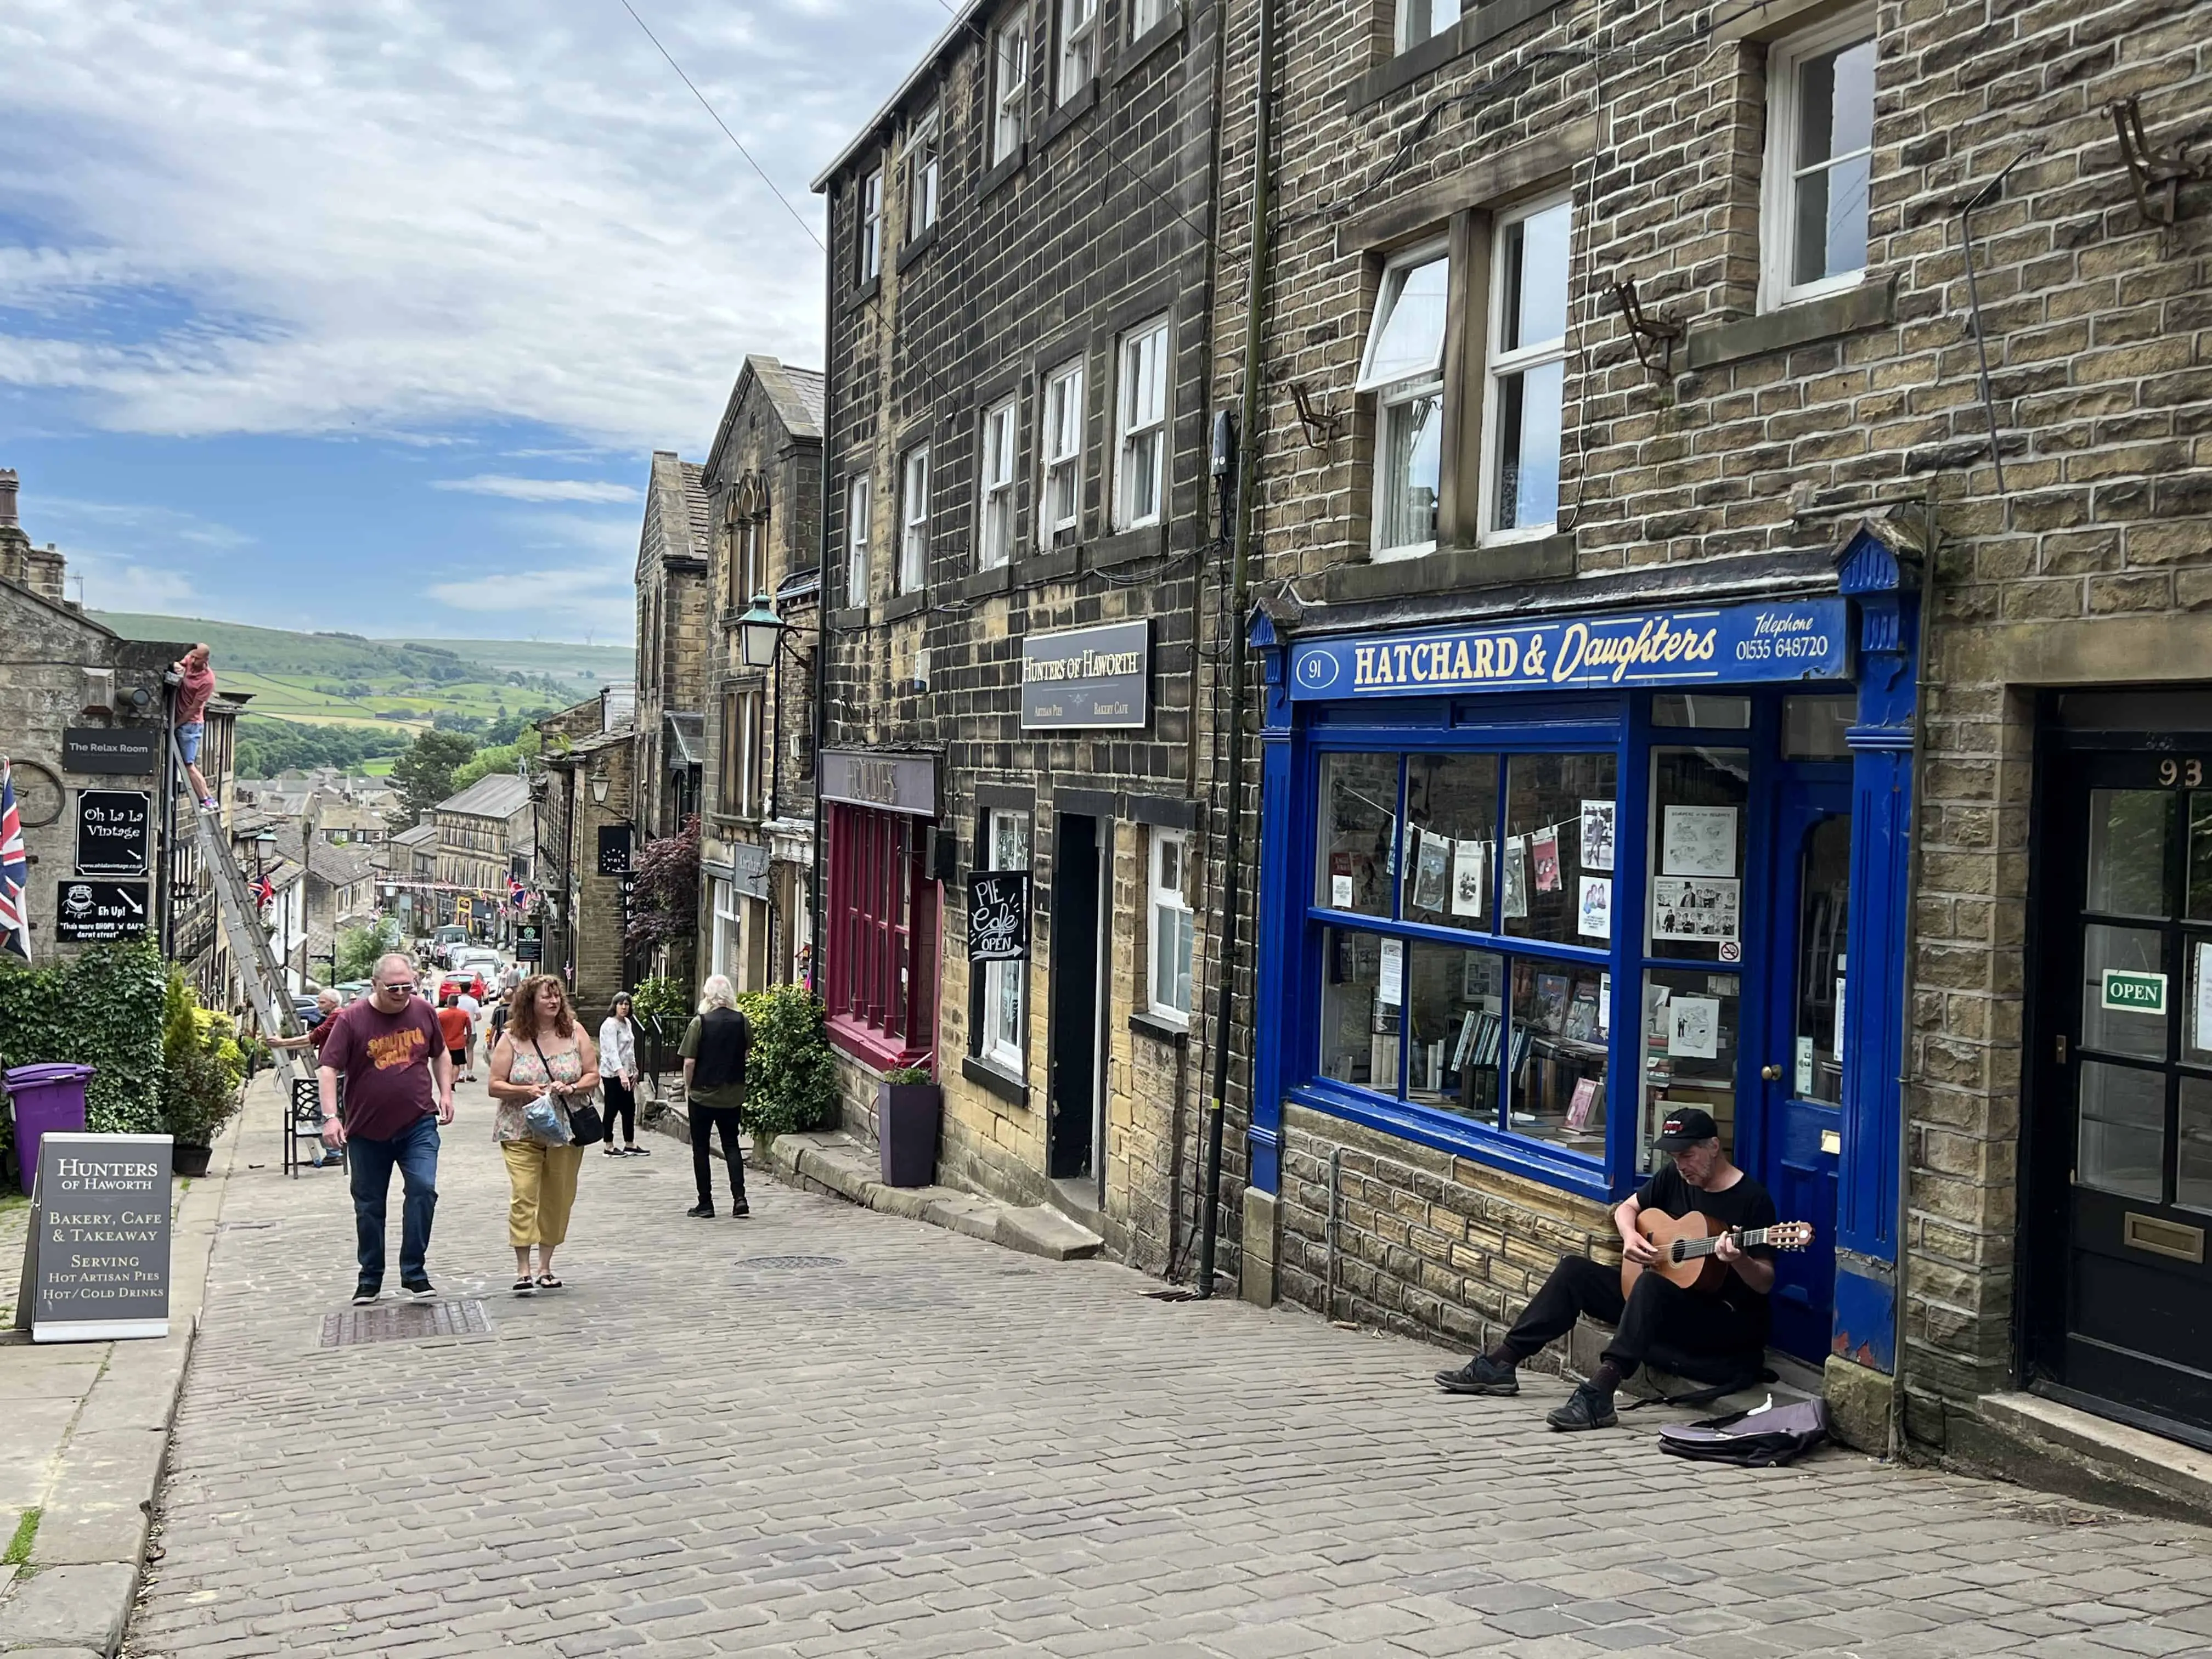 A man with a classical guitar is sitting at a storefront to collect donations. Haworth's main street has black and tan bricked-buildings and a gray cobblestone street. The rolling green hills and trees of the English countryside is in the distance. Main Street, Haworth, Bradford, West Yorkshire, England, United Kingdom.